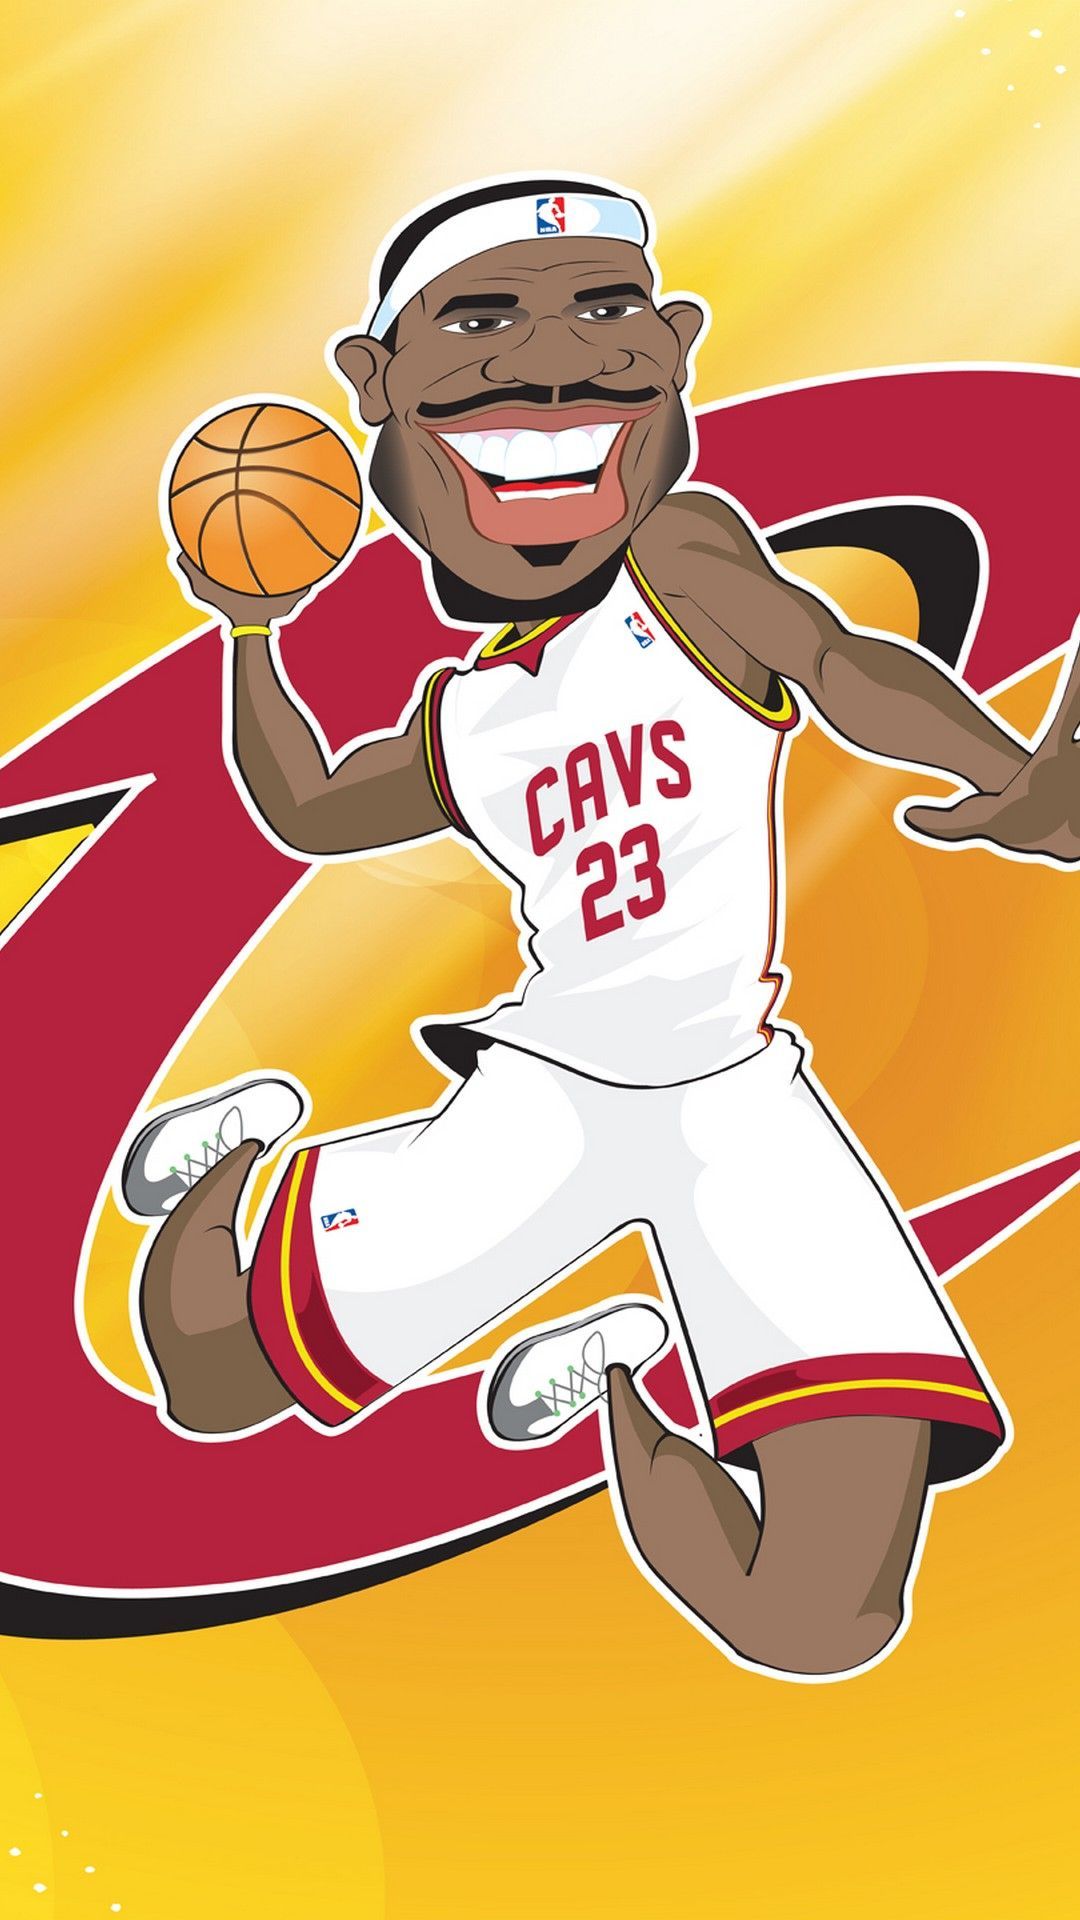 Cleveland Cavaliers NBA iPhone 8 Wallpaper Basketball Wallpaper. Cavaliers nba, Basketball wallpaper, Basketball drawings